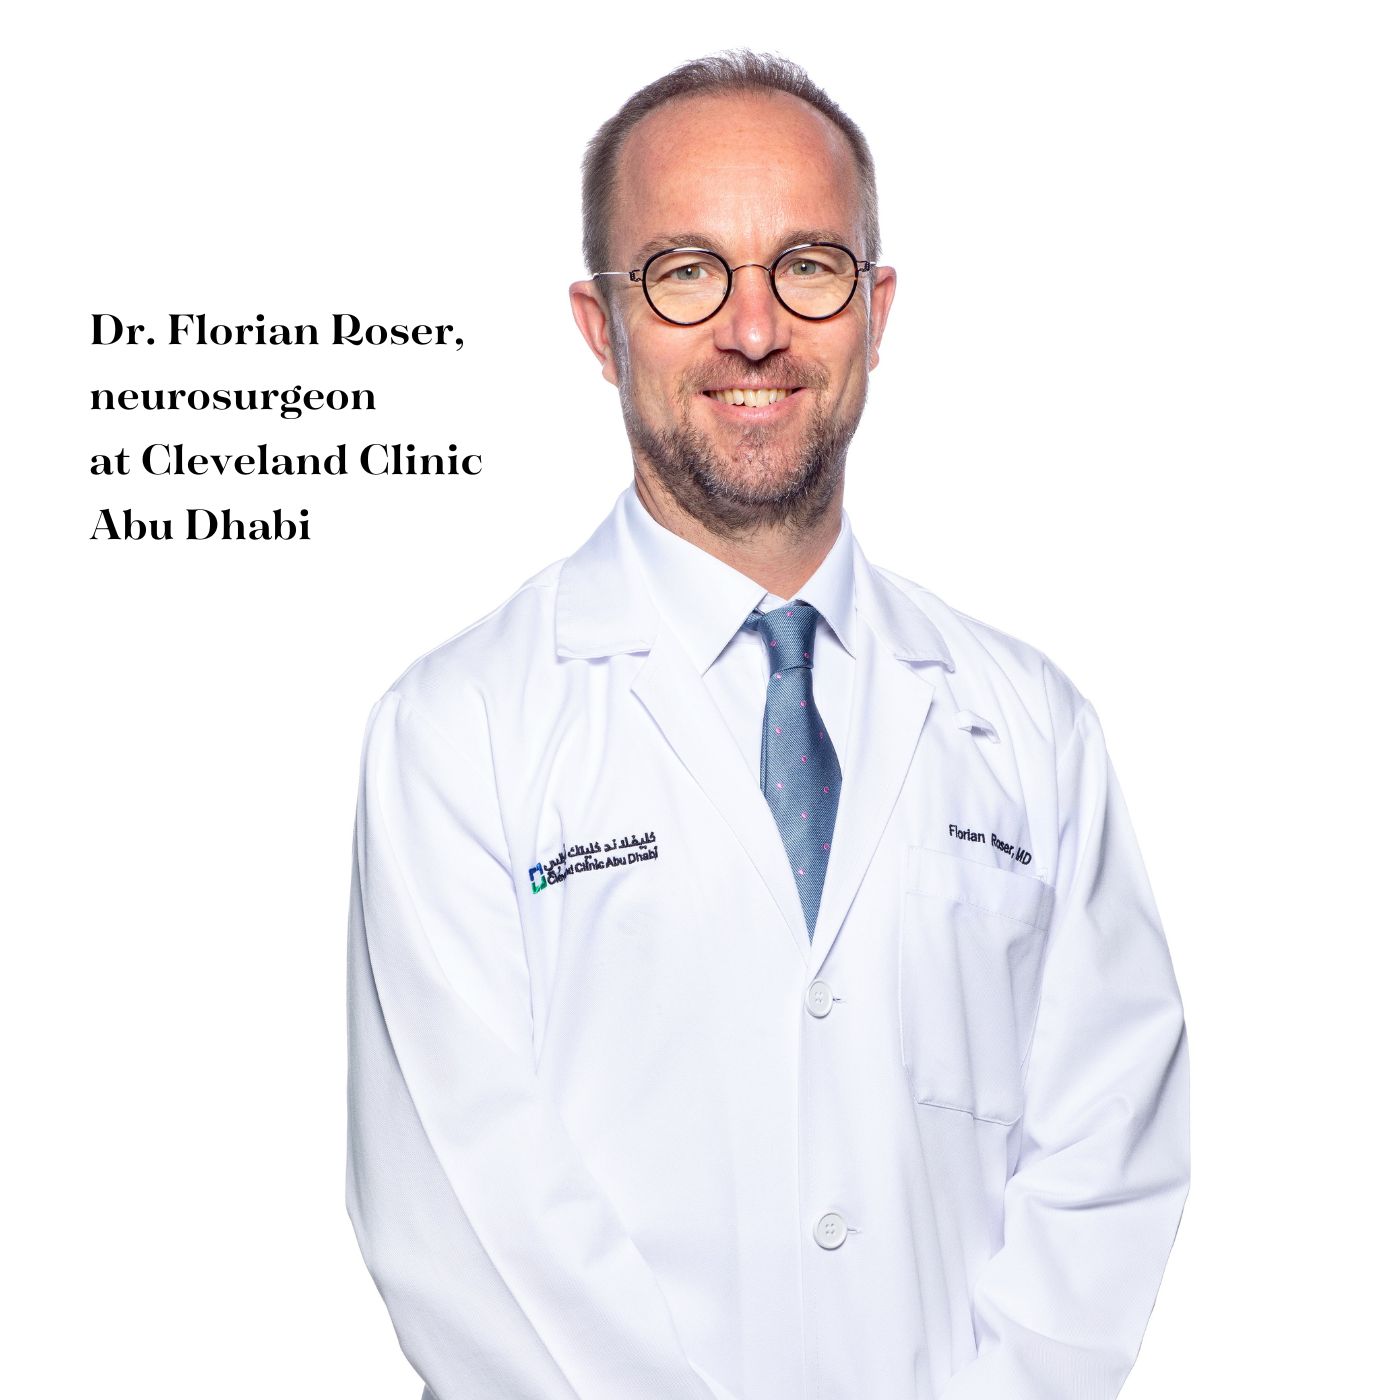 Neurosurgeon Dr Florian Roser wants you to use your brain